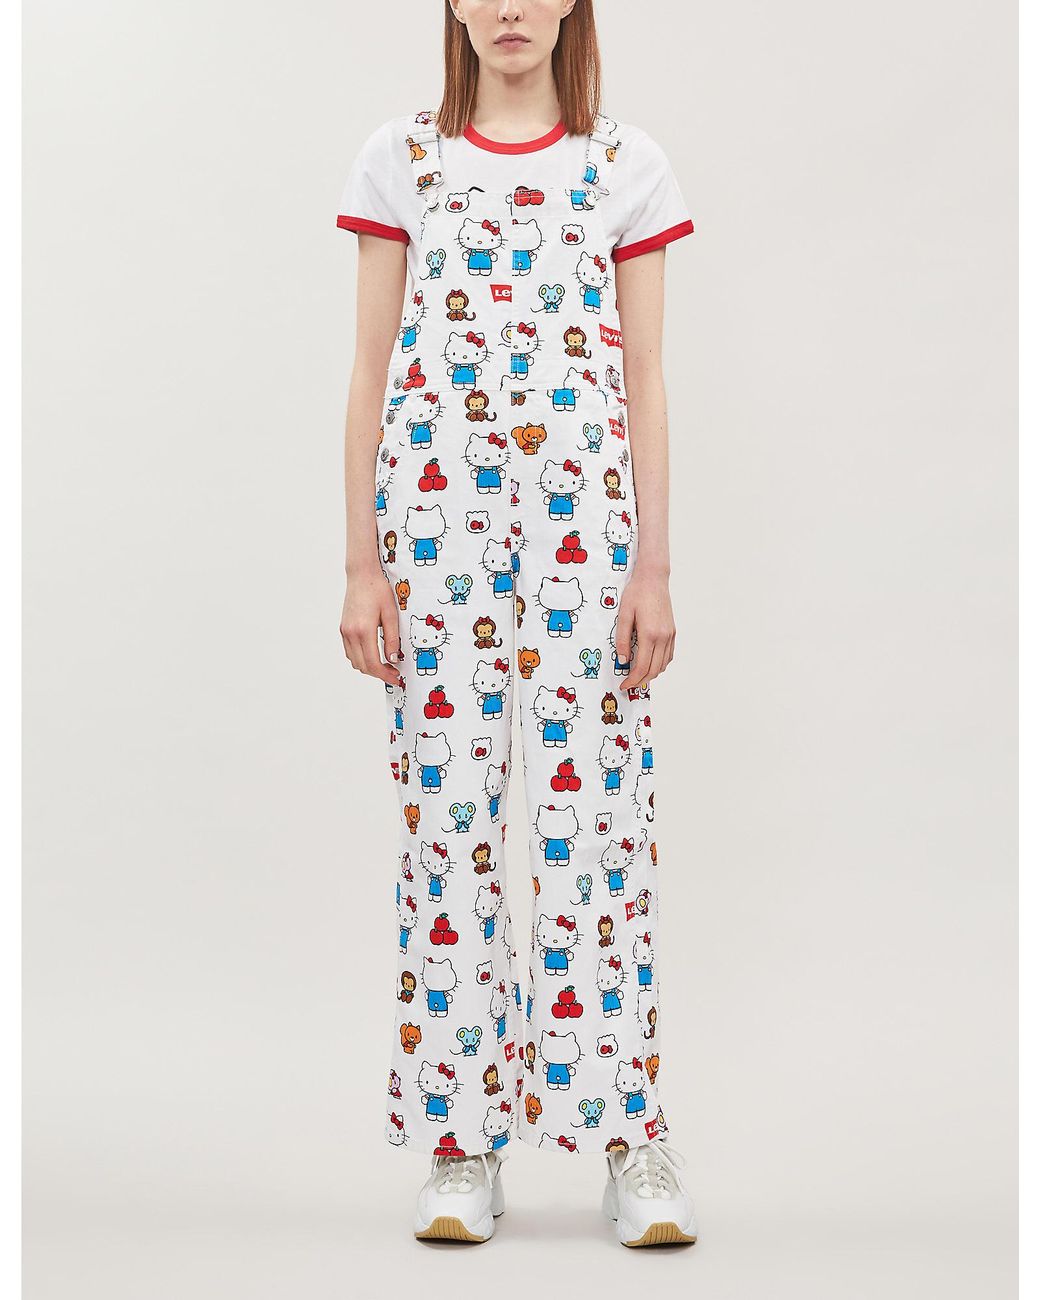 Levi's X Hello Kitty Printed Denim Dungarees in Blue | Lyst